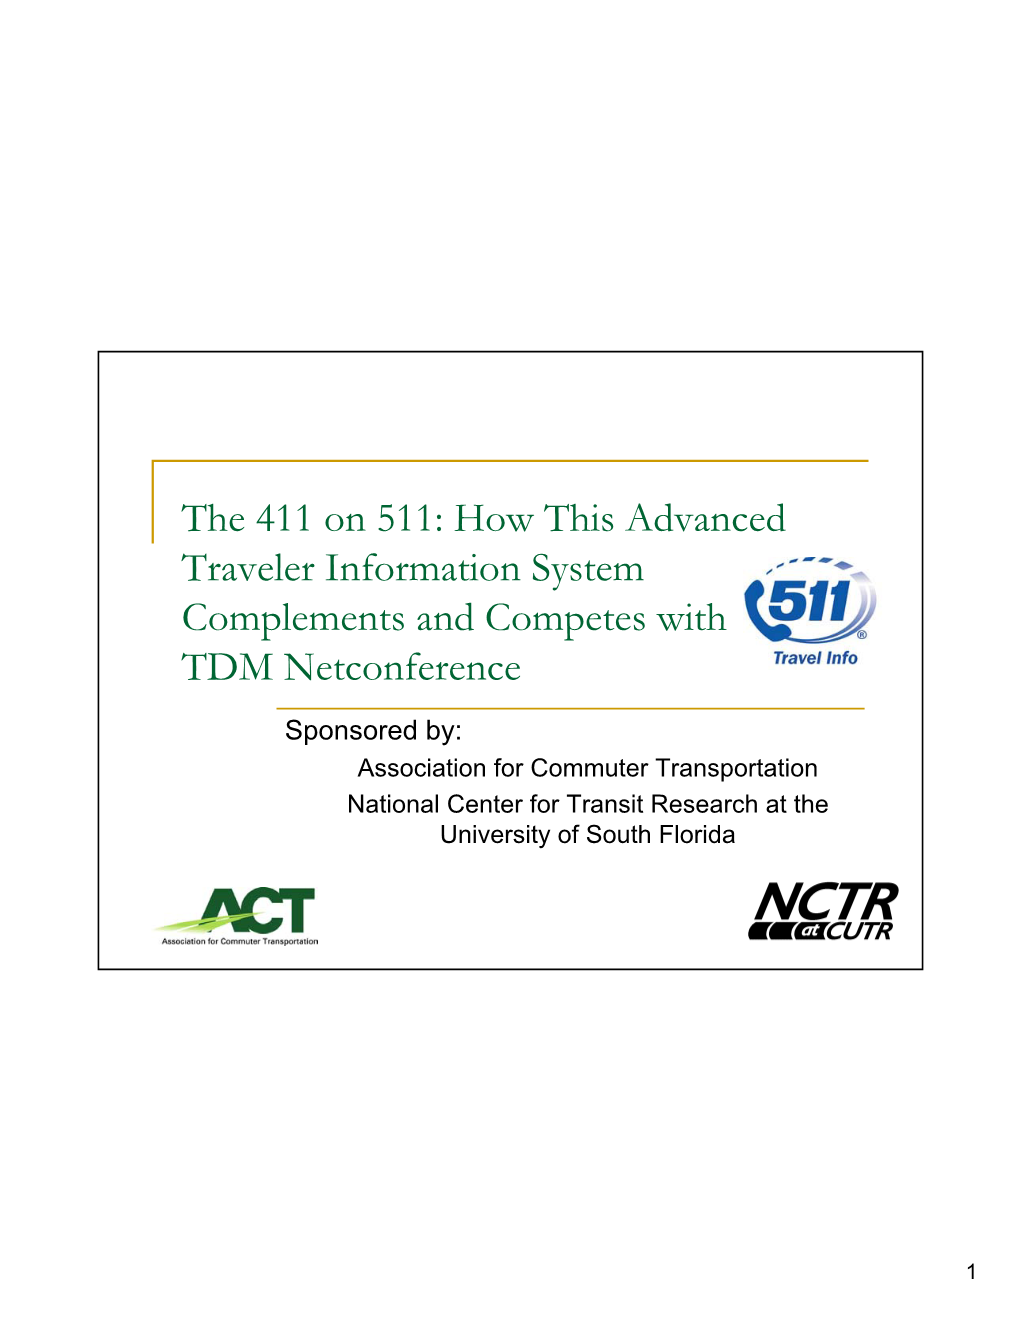 The 411 on 511: How This Advanced Traveler Information System Complements and Competes with TDM Netconference